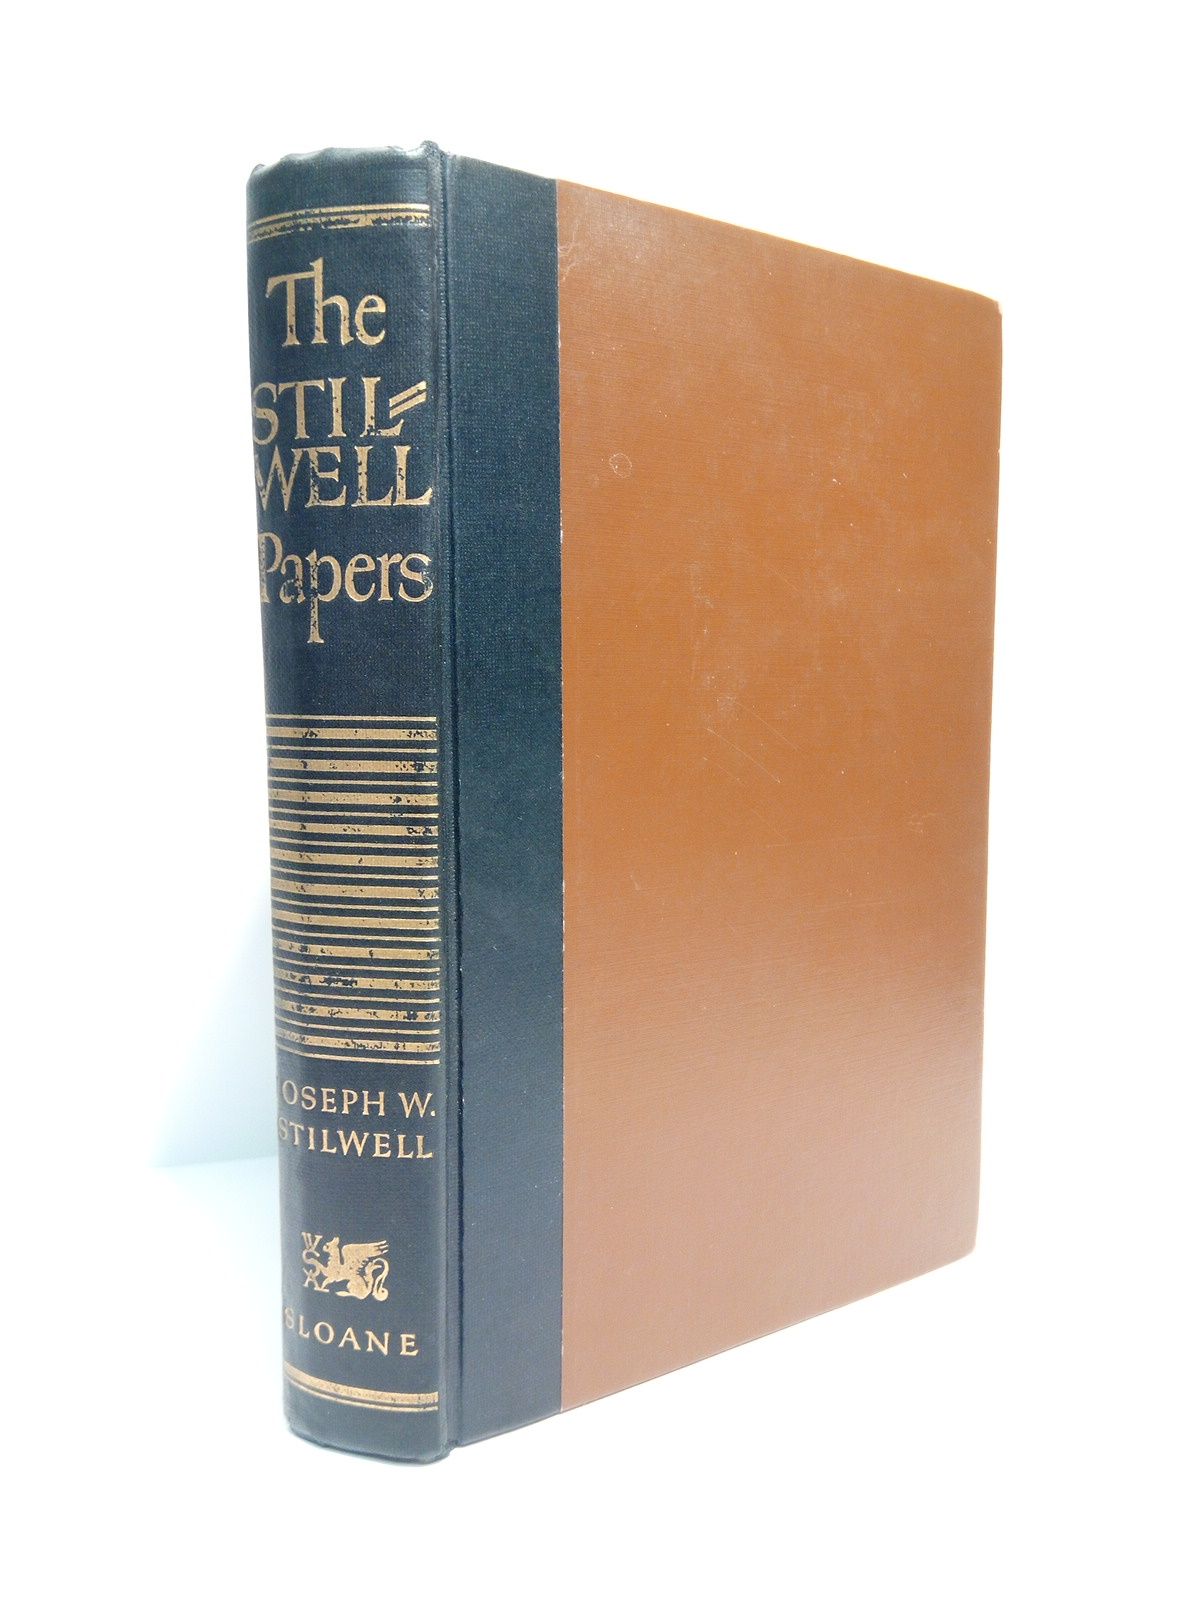 STILWELL, Joseph W. - The Stilwell Papers /  Arranged and Edited by Theodore H. White